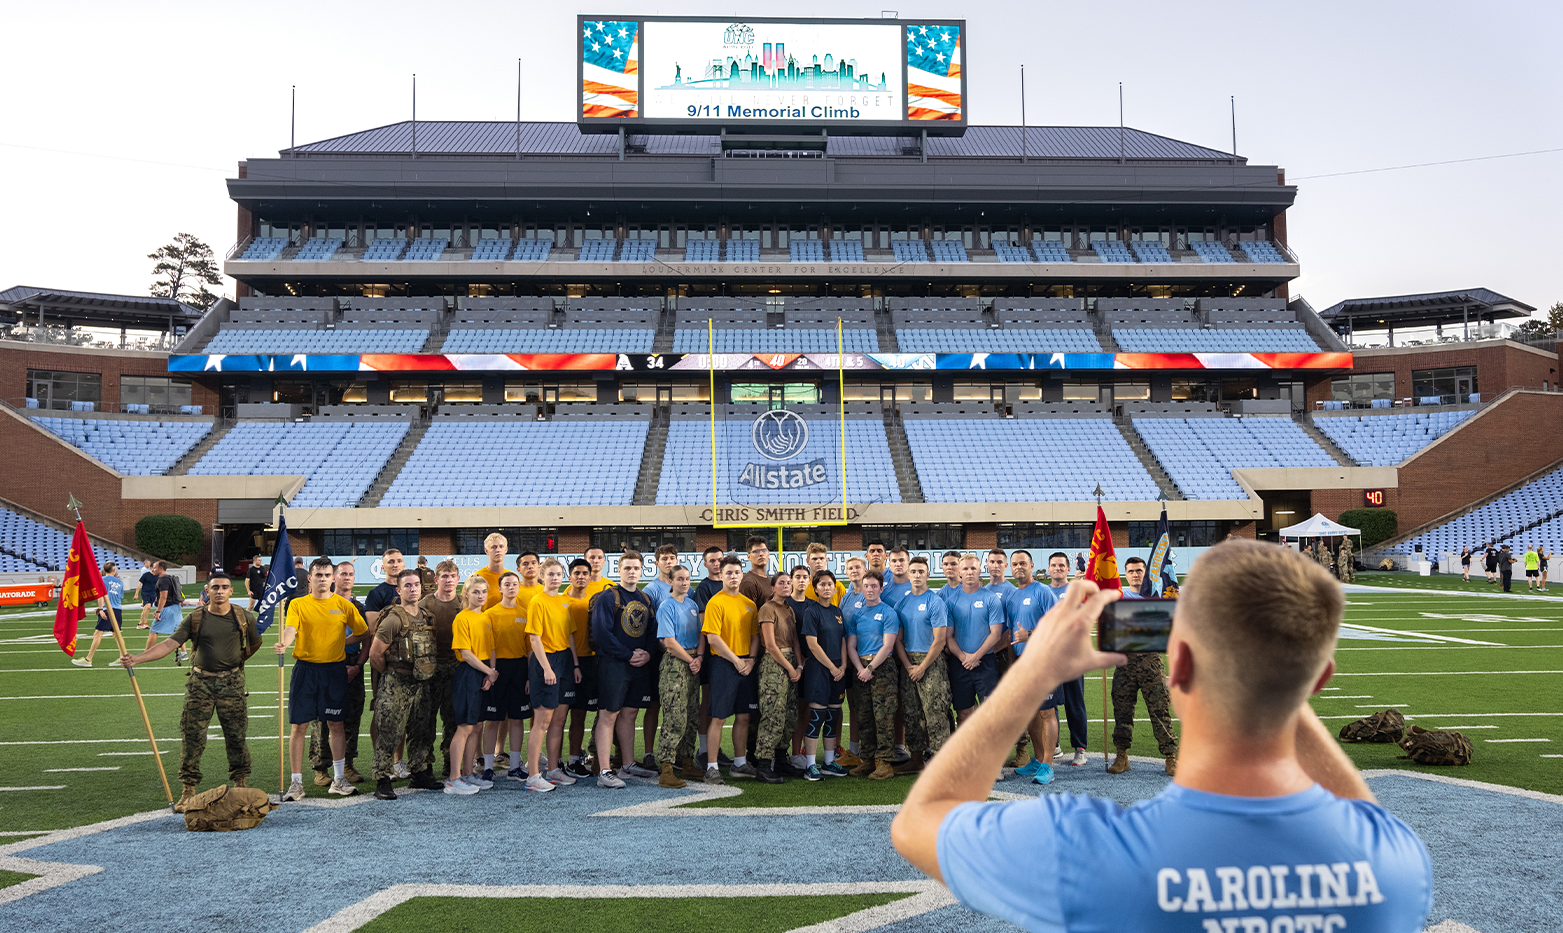 The back of a person holding a photo horizontally and taking a group photo of ROTC members on a football field. In the background, a video board shows a graphic with American flags reading 